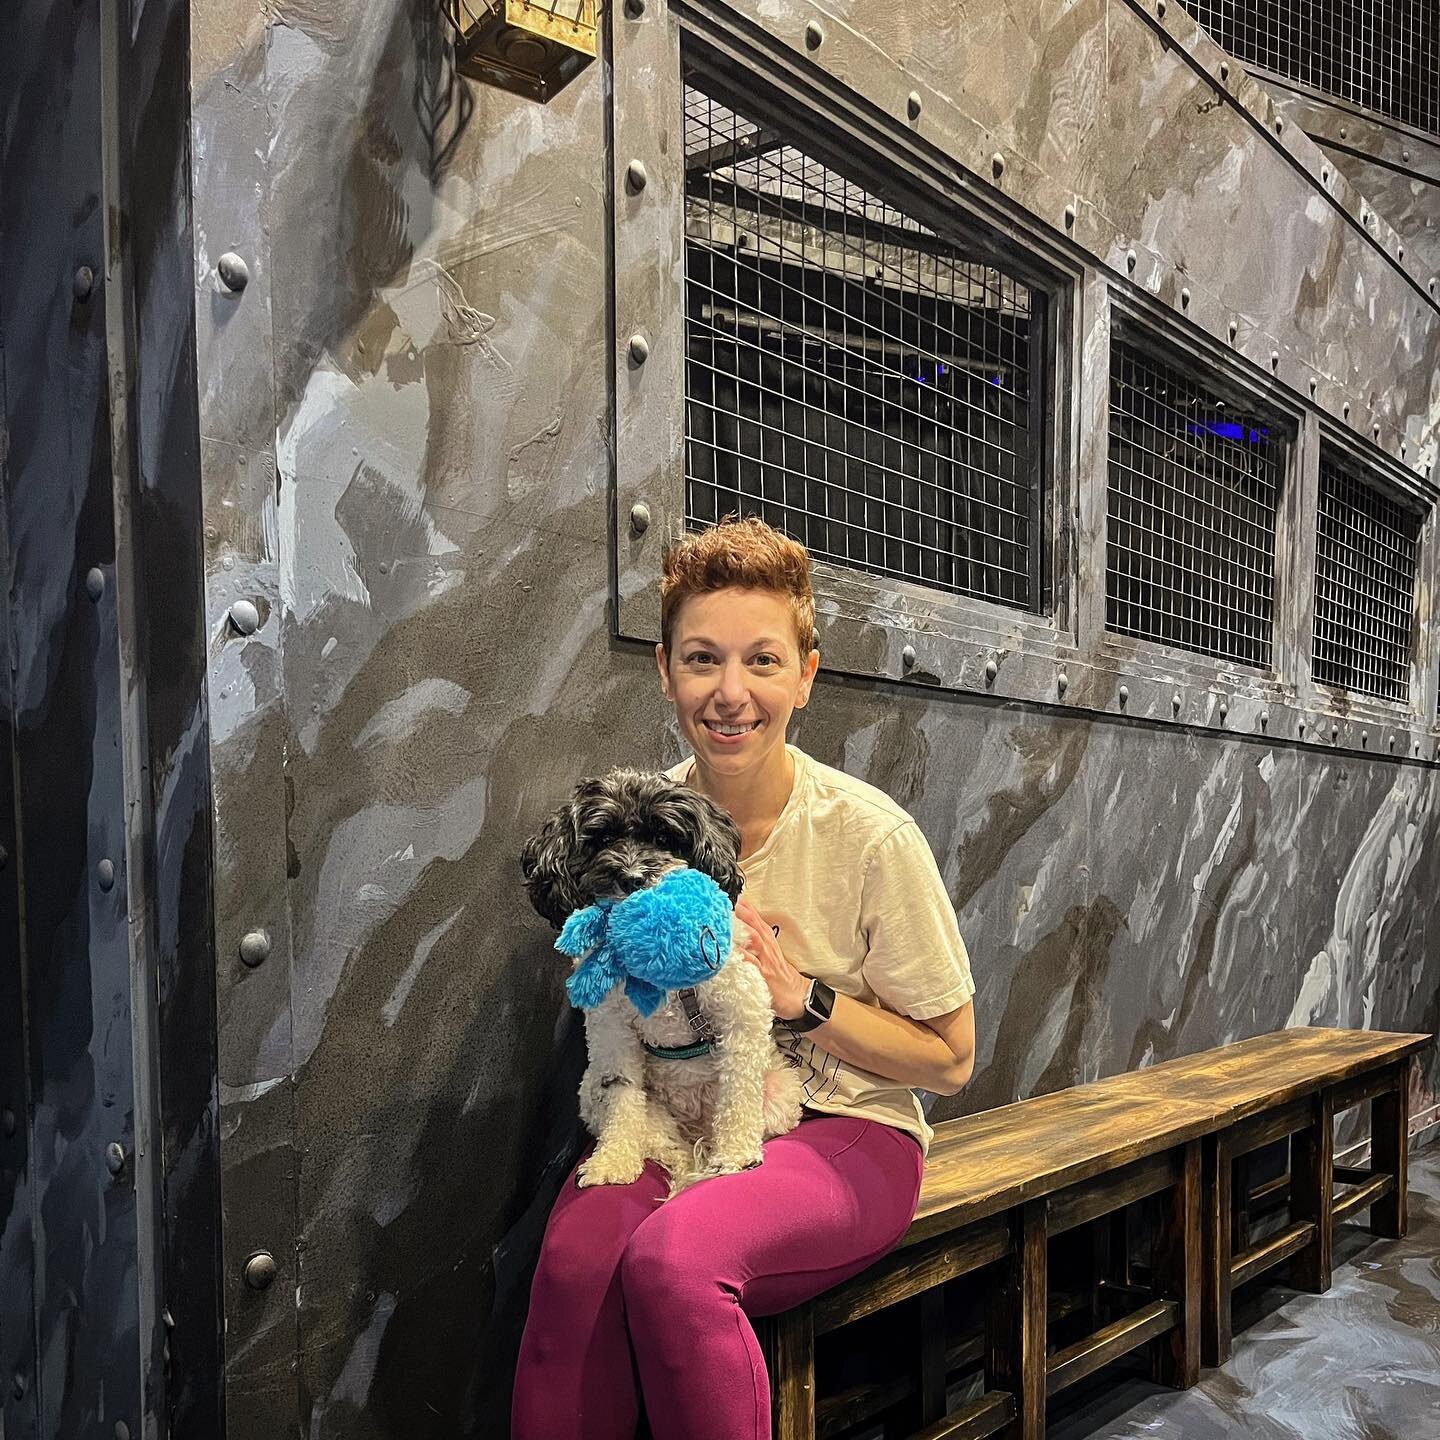 Bring your daughter to work day! @tink_rdoodle is the MOST popular pup on Fleet Street. 

📸: @sarnalisa 

#choreographer #broadwaydoodle #travelingpup #dogmom #doodlesofinstagram #cutedog #theaterdog